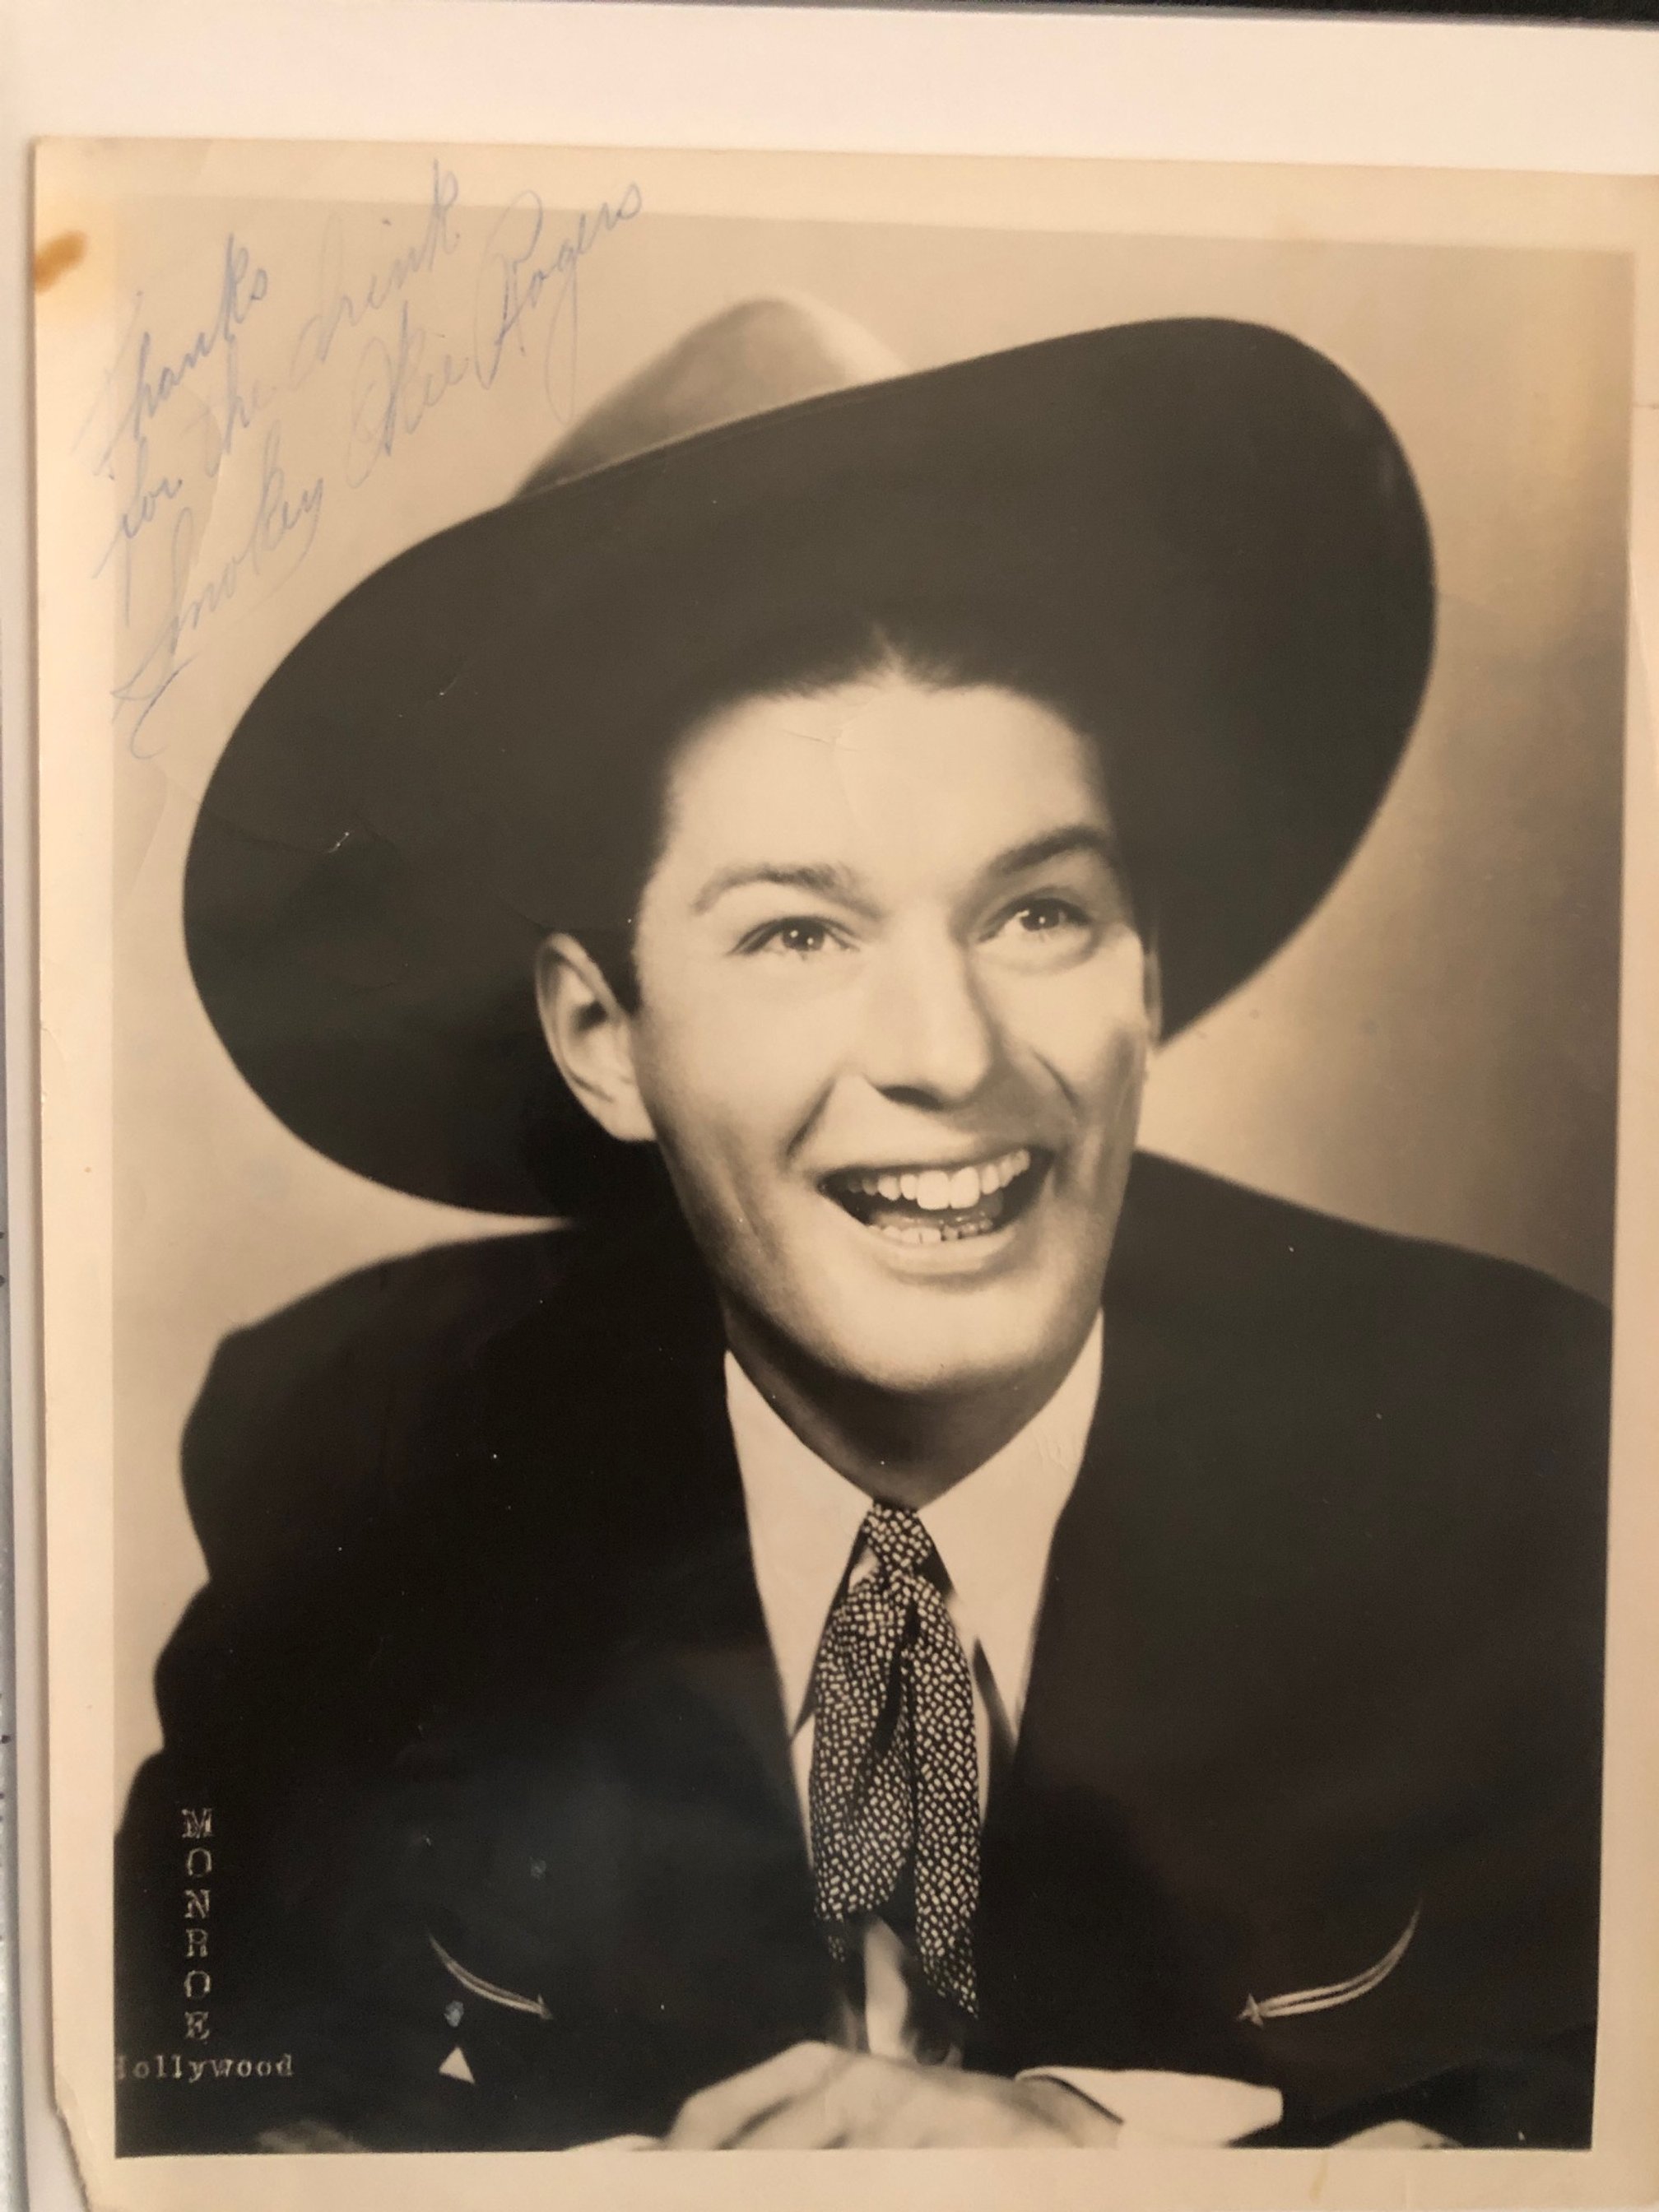 Lynch collection - Roy Rogers maybe signed - image12 - 5-21-2022.jpeg